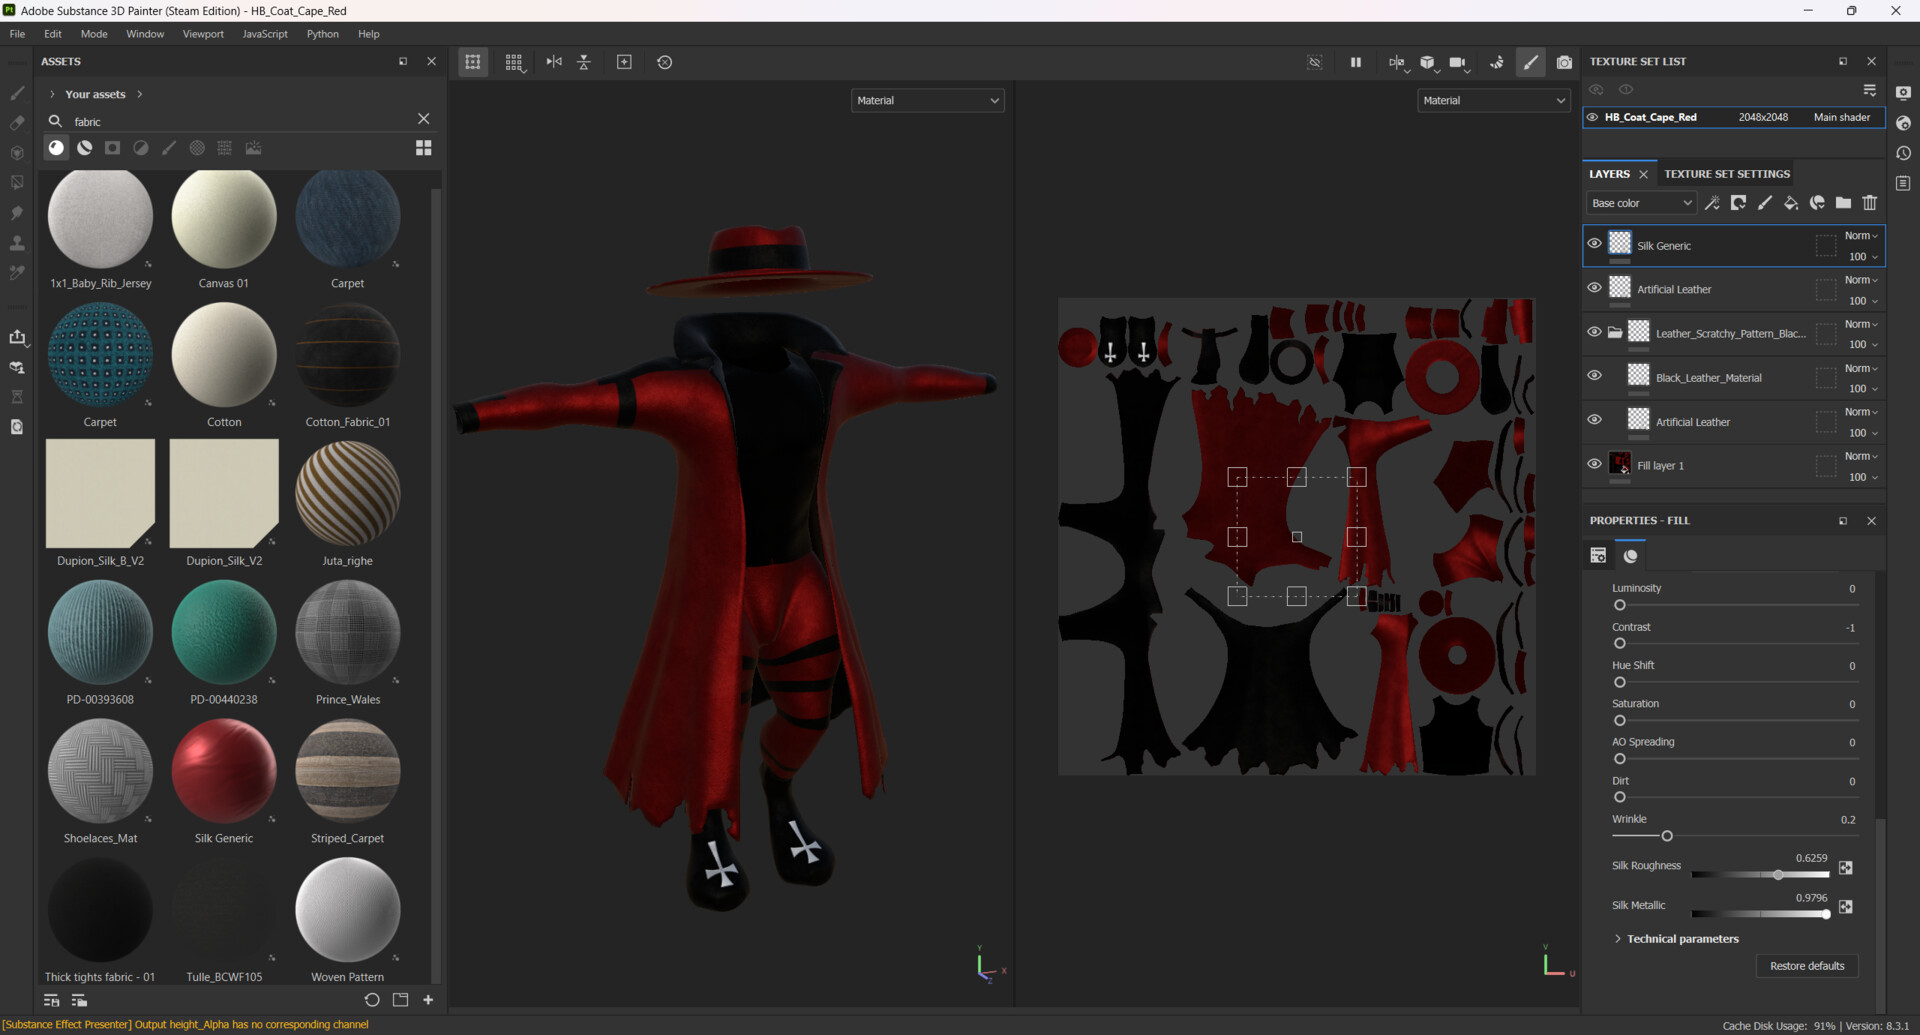 ArtStation - Long Black/Red Cloak and Boots (VRChat Avatar Creation)